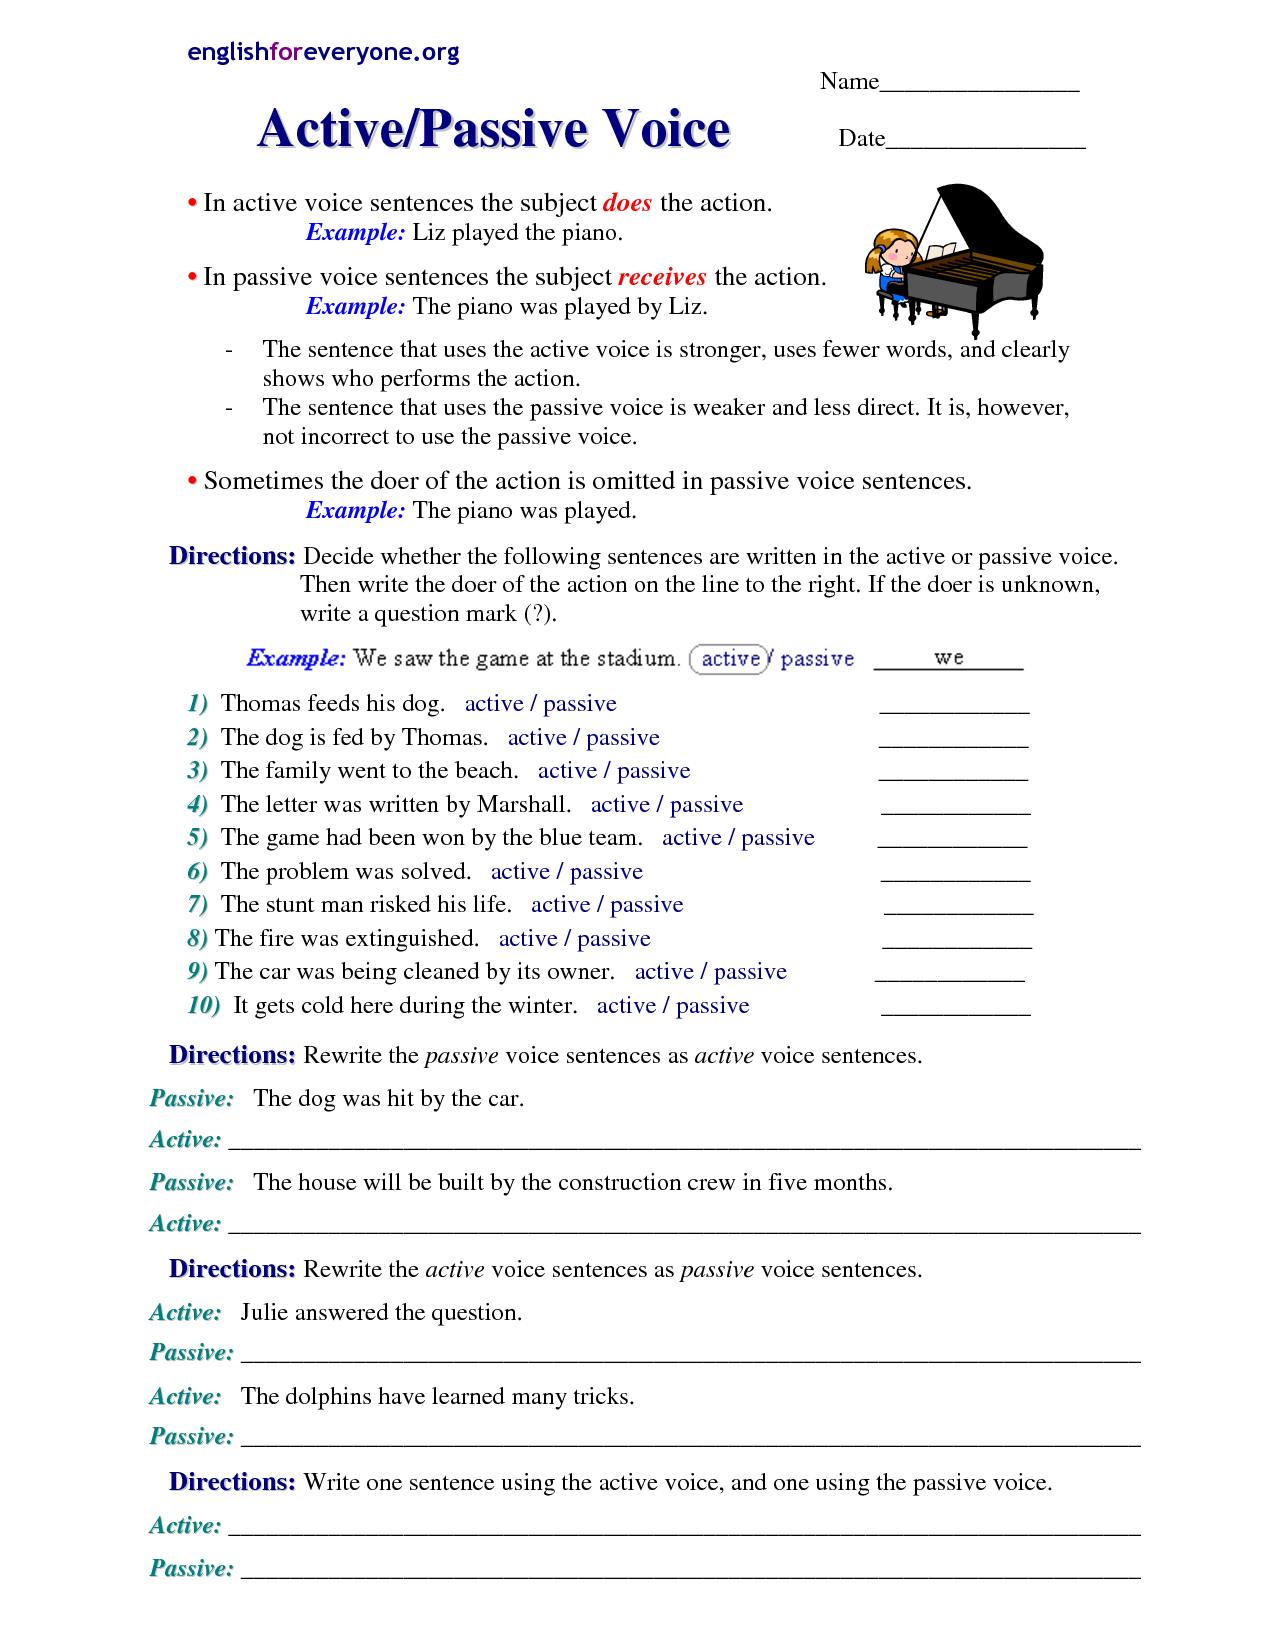 active-and-passive-voice-definition-types-examples-and-worksheets-cloud-hot-girl